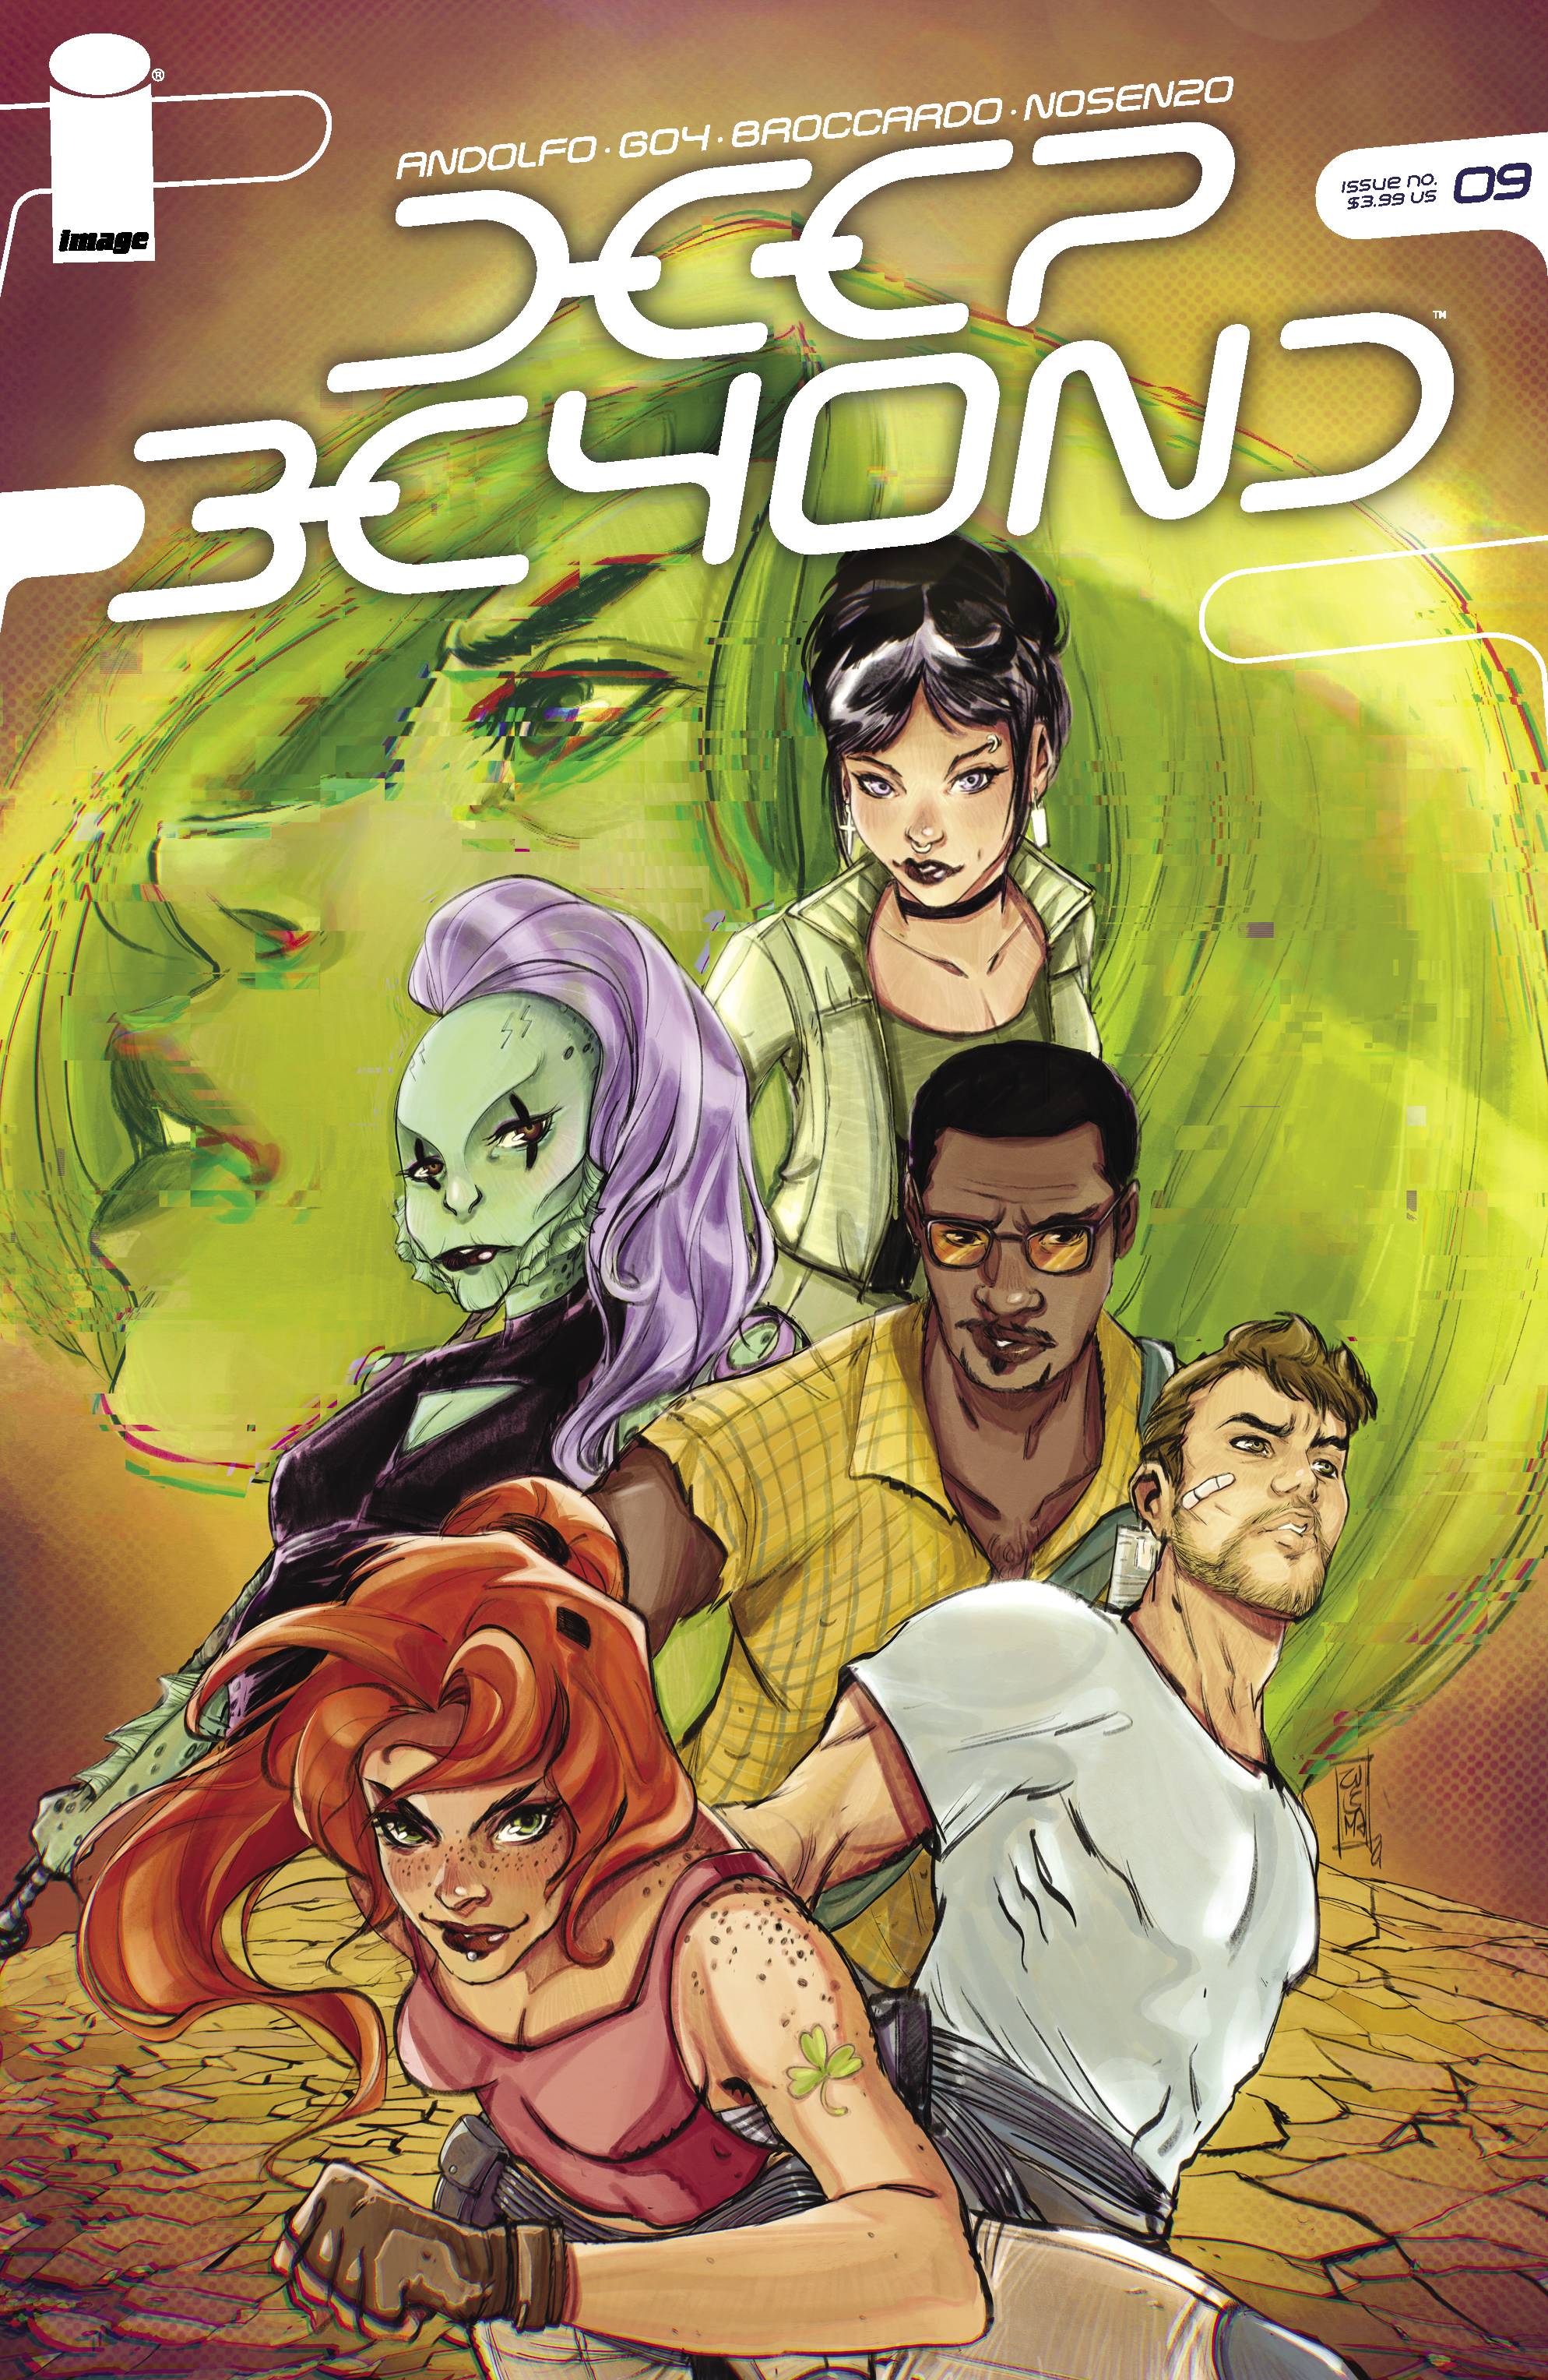 Deep Beyond #9 (Of 12) Cover D Lavina